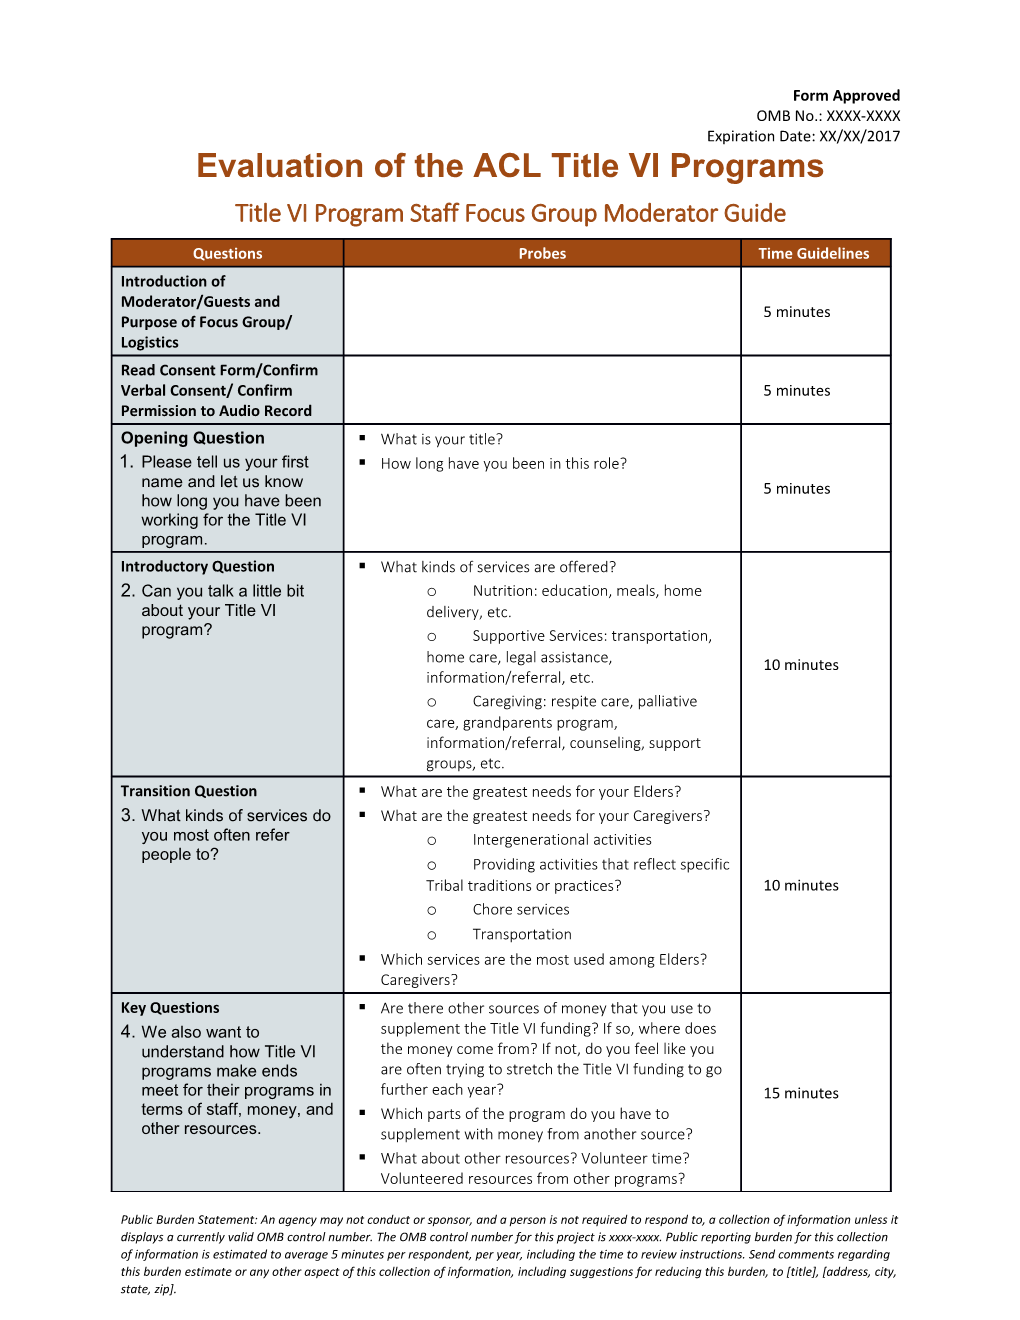 Evaluation of the ACL Title VI Programs